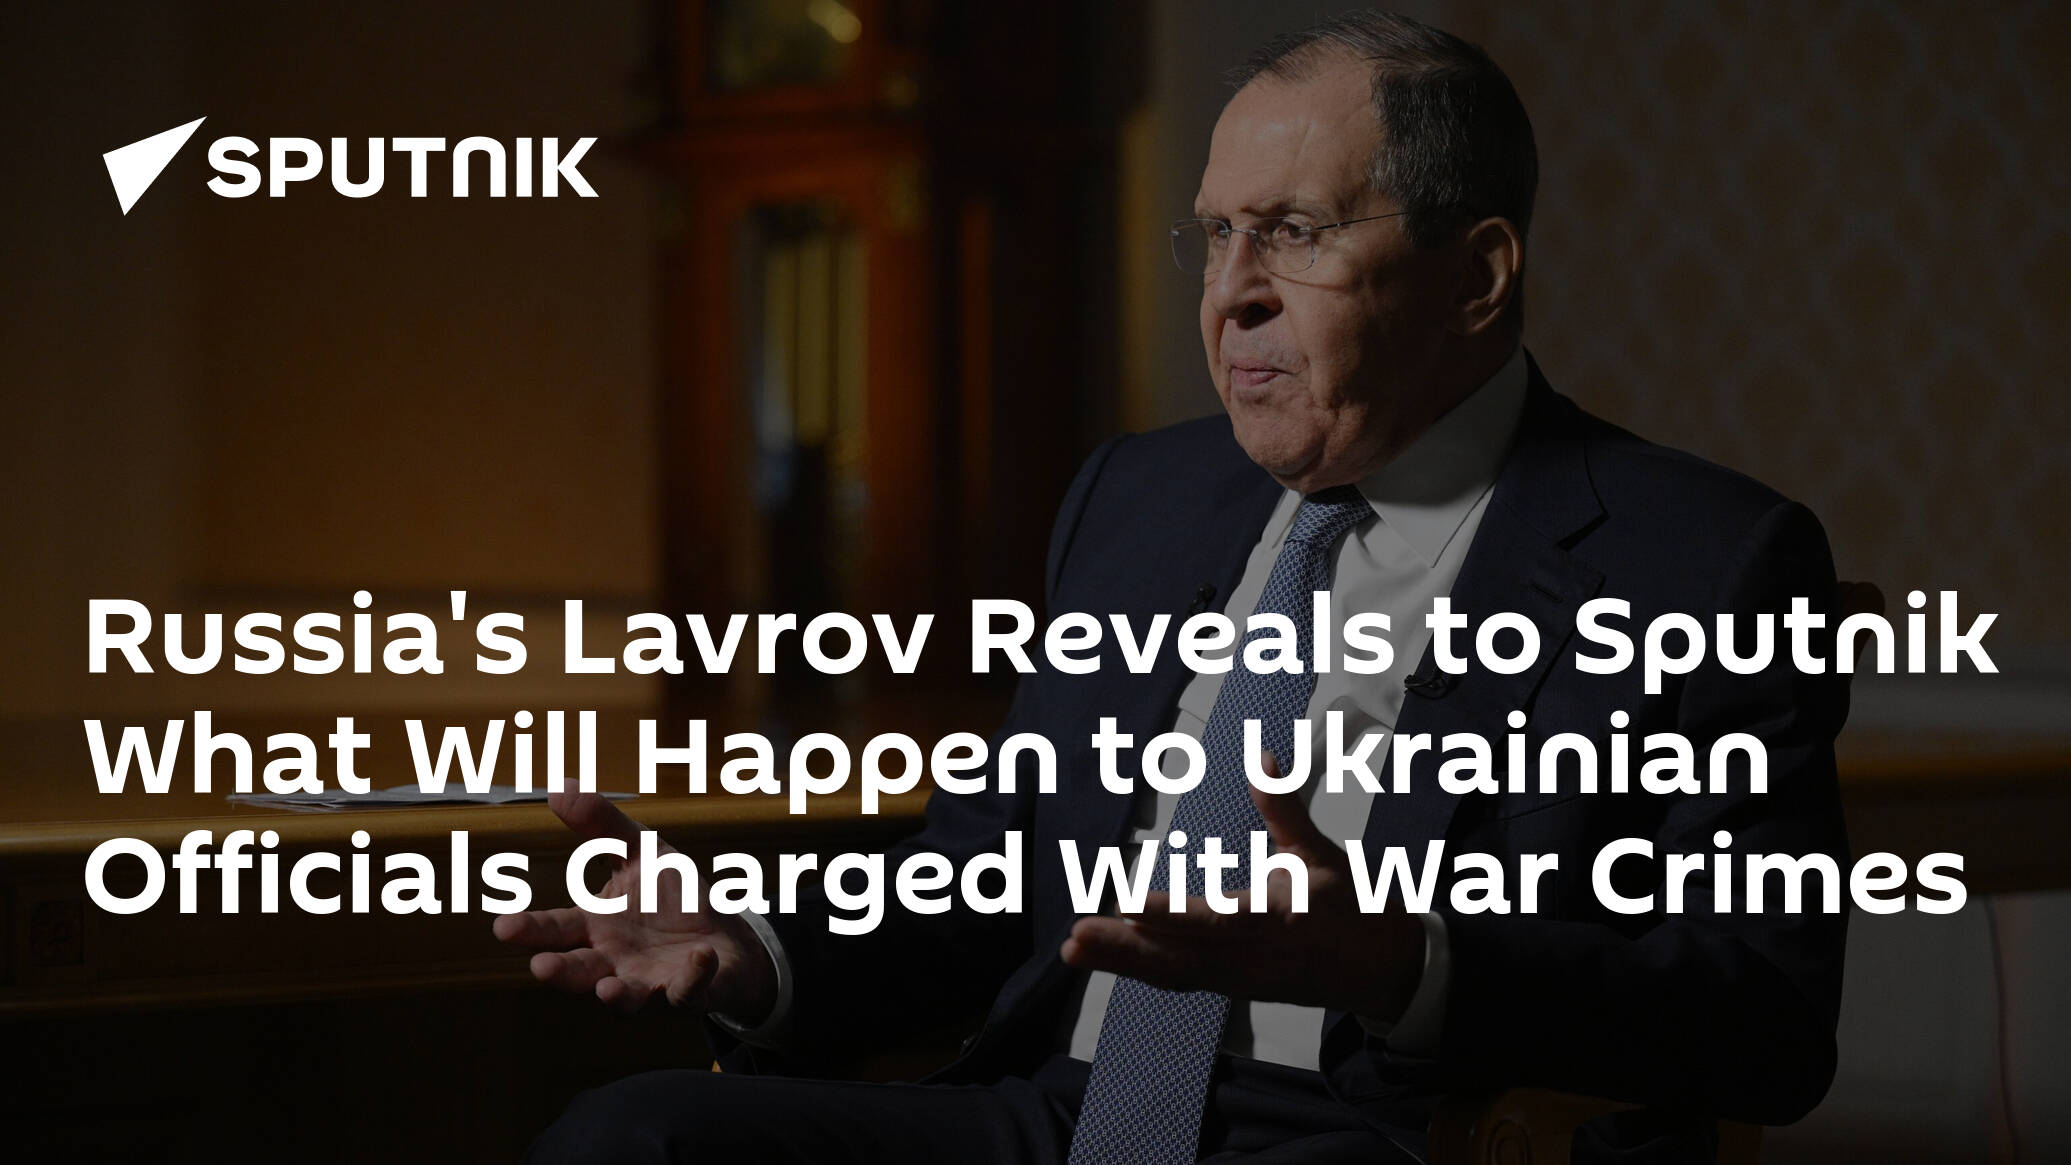 Russia's Lavrov Reveals to Sputnik What Will Happen to Ukrainian Officials Charged With War Crimes